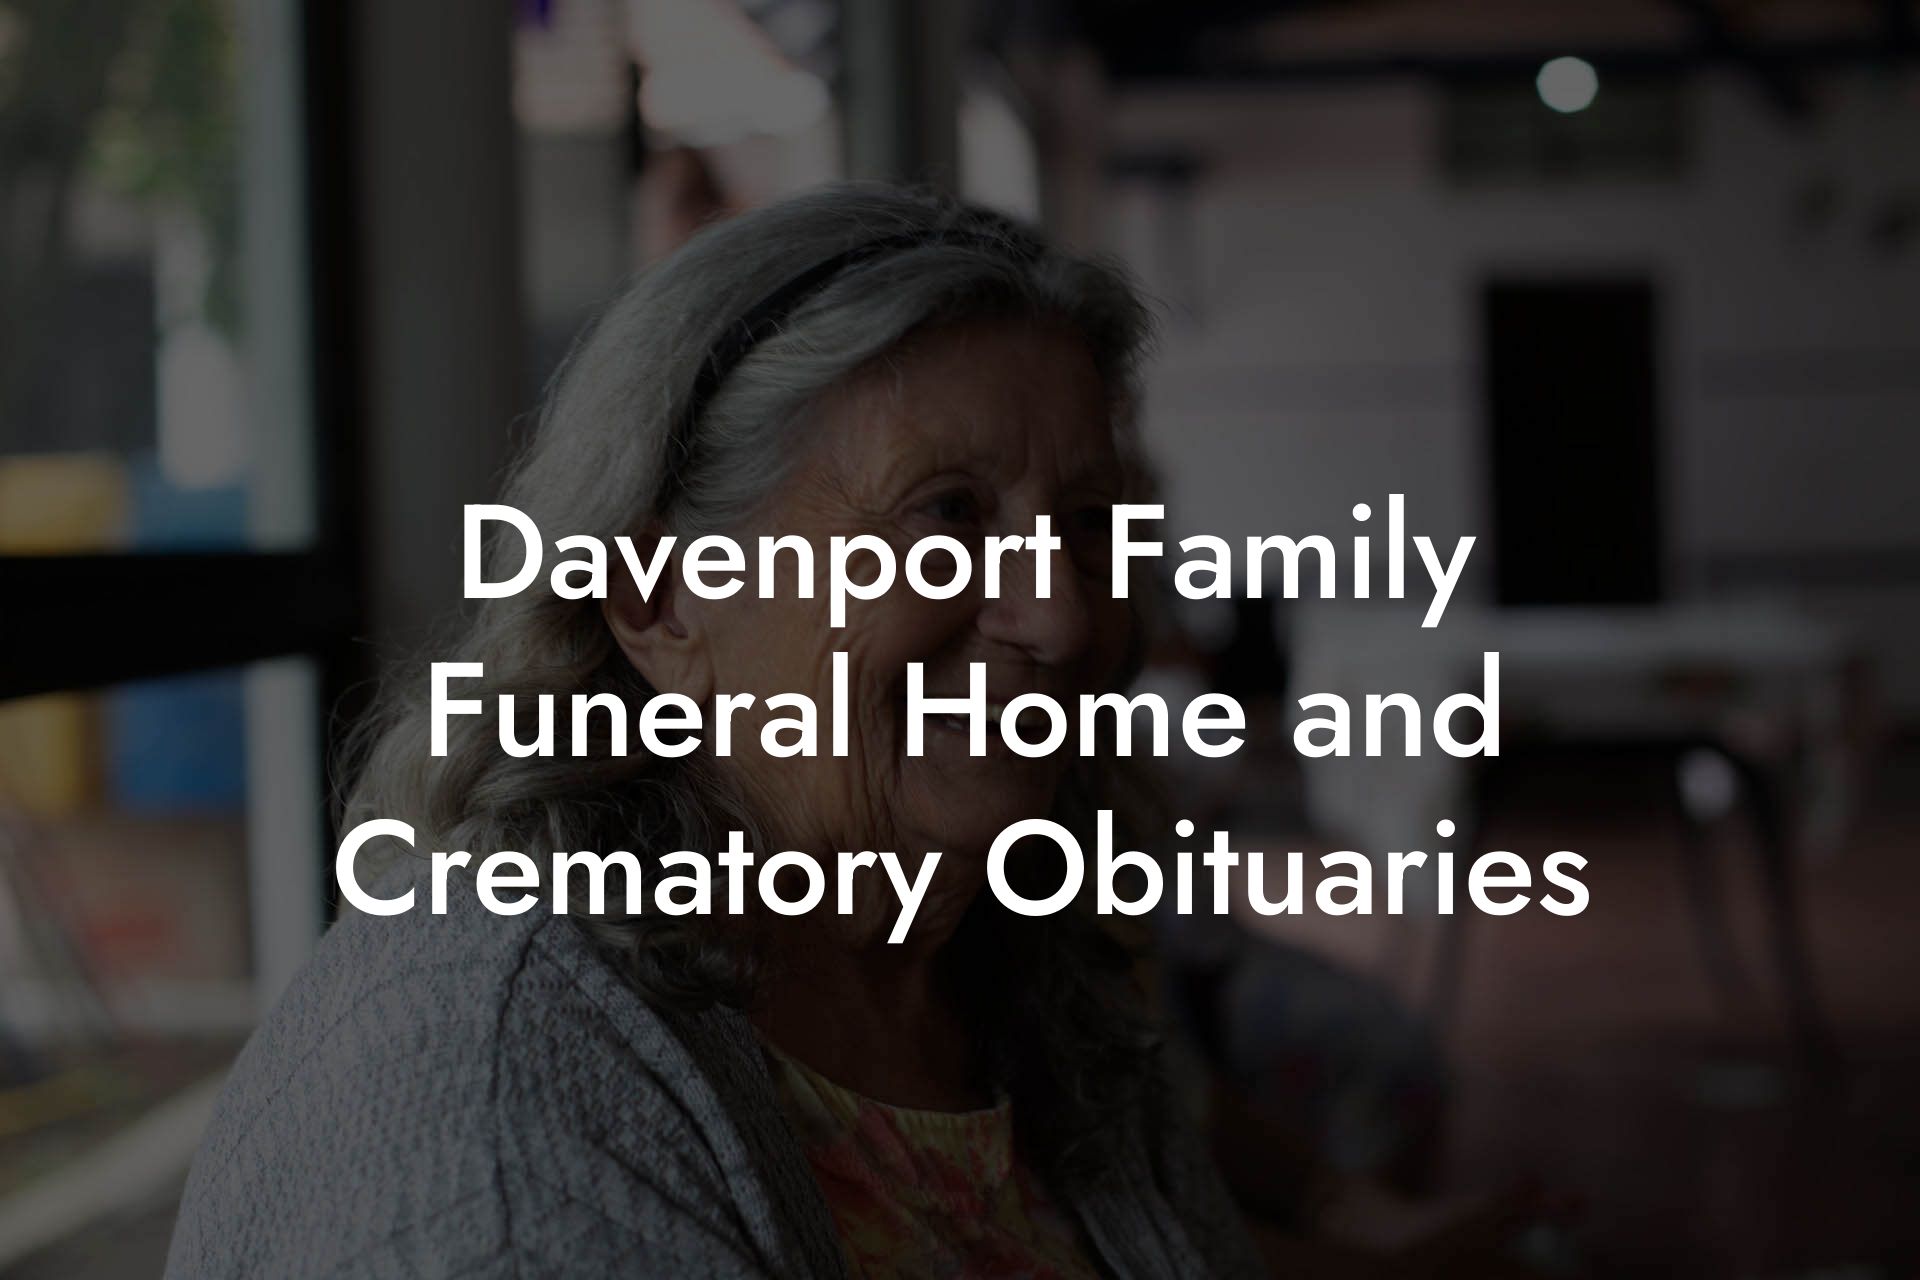 Davenport Family Funeral Home and Crematory Obituaries